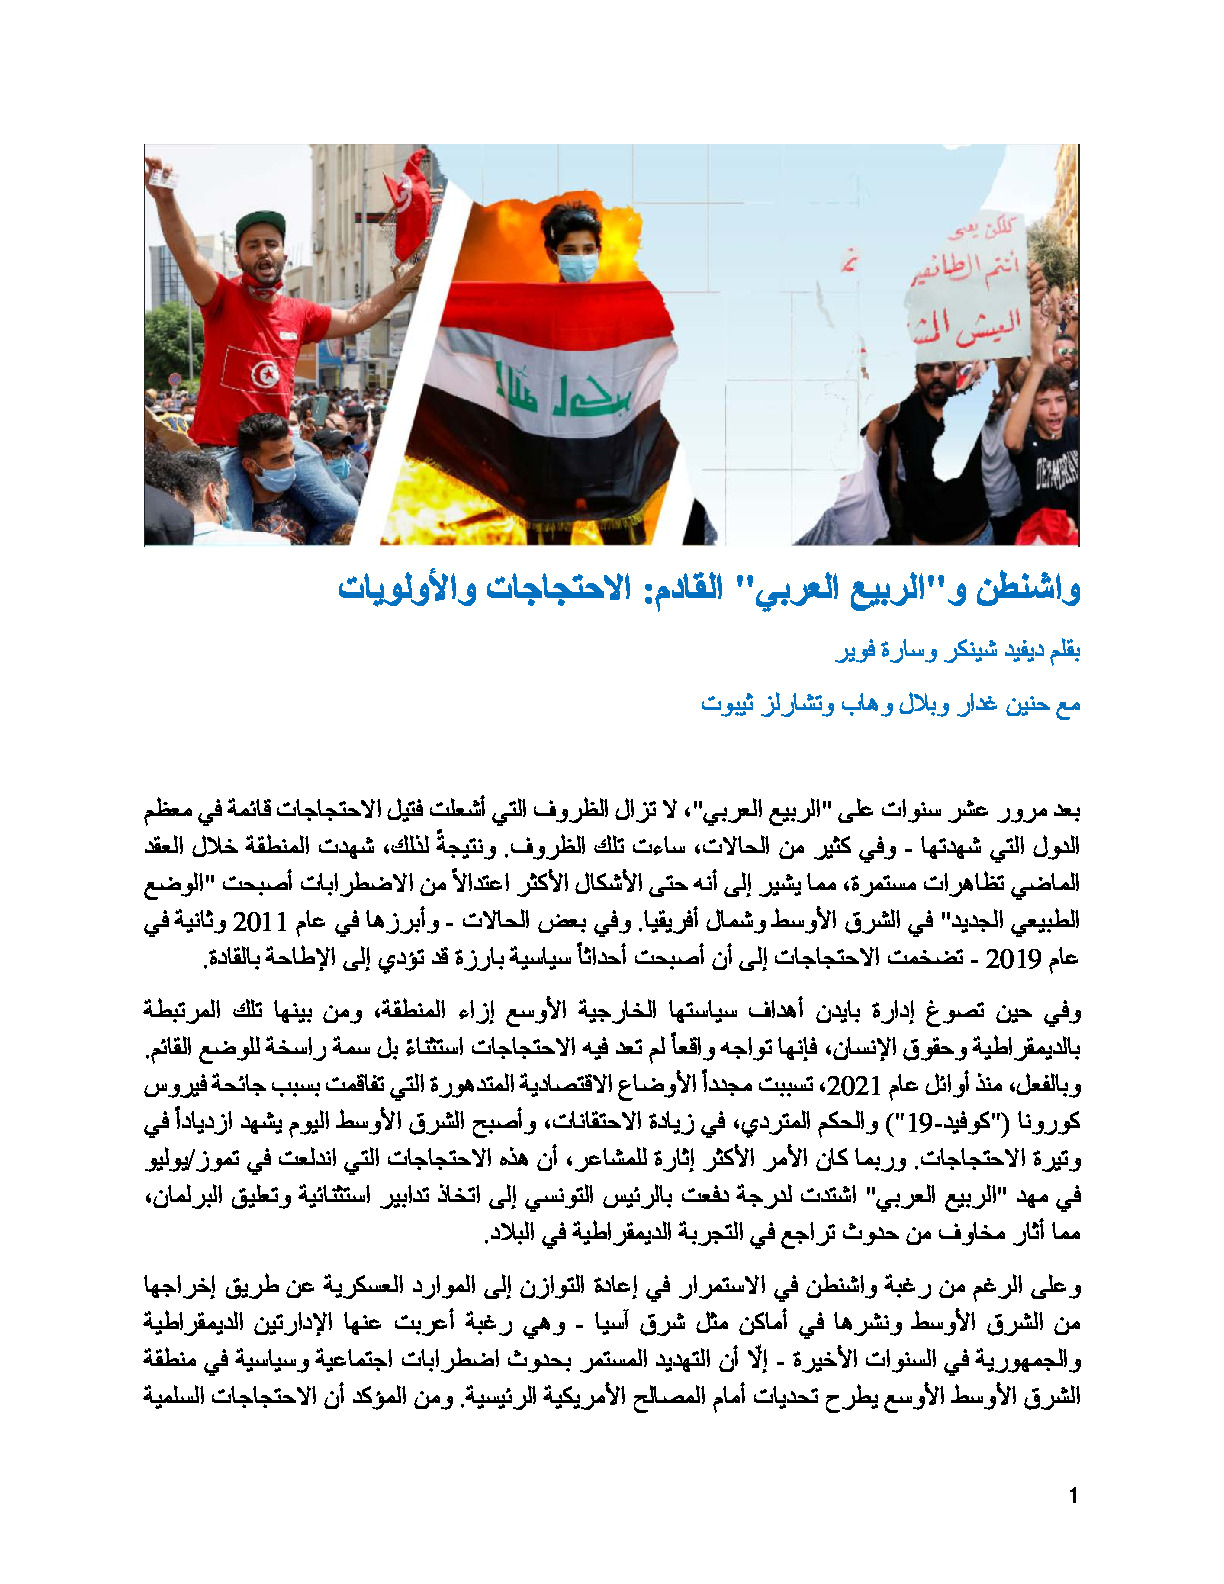 Washington_and the Next Arab Spring_Protests and Priorities.pdf